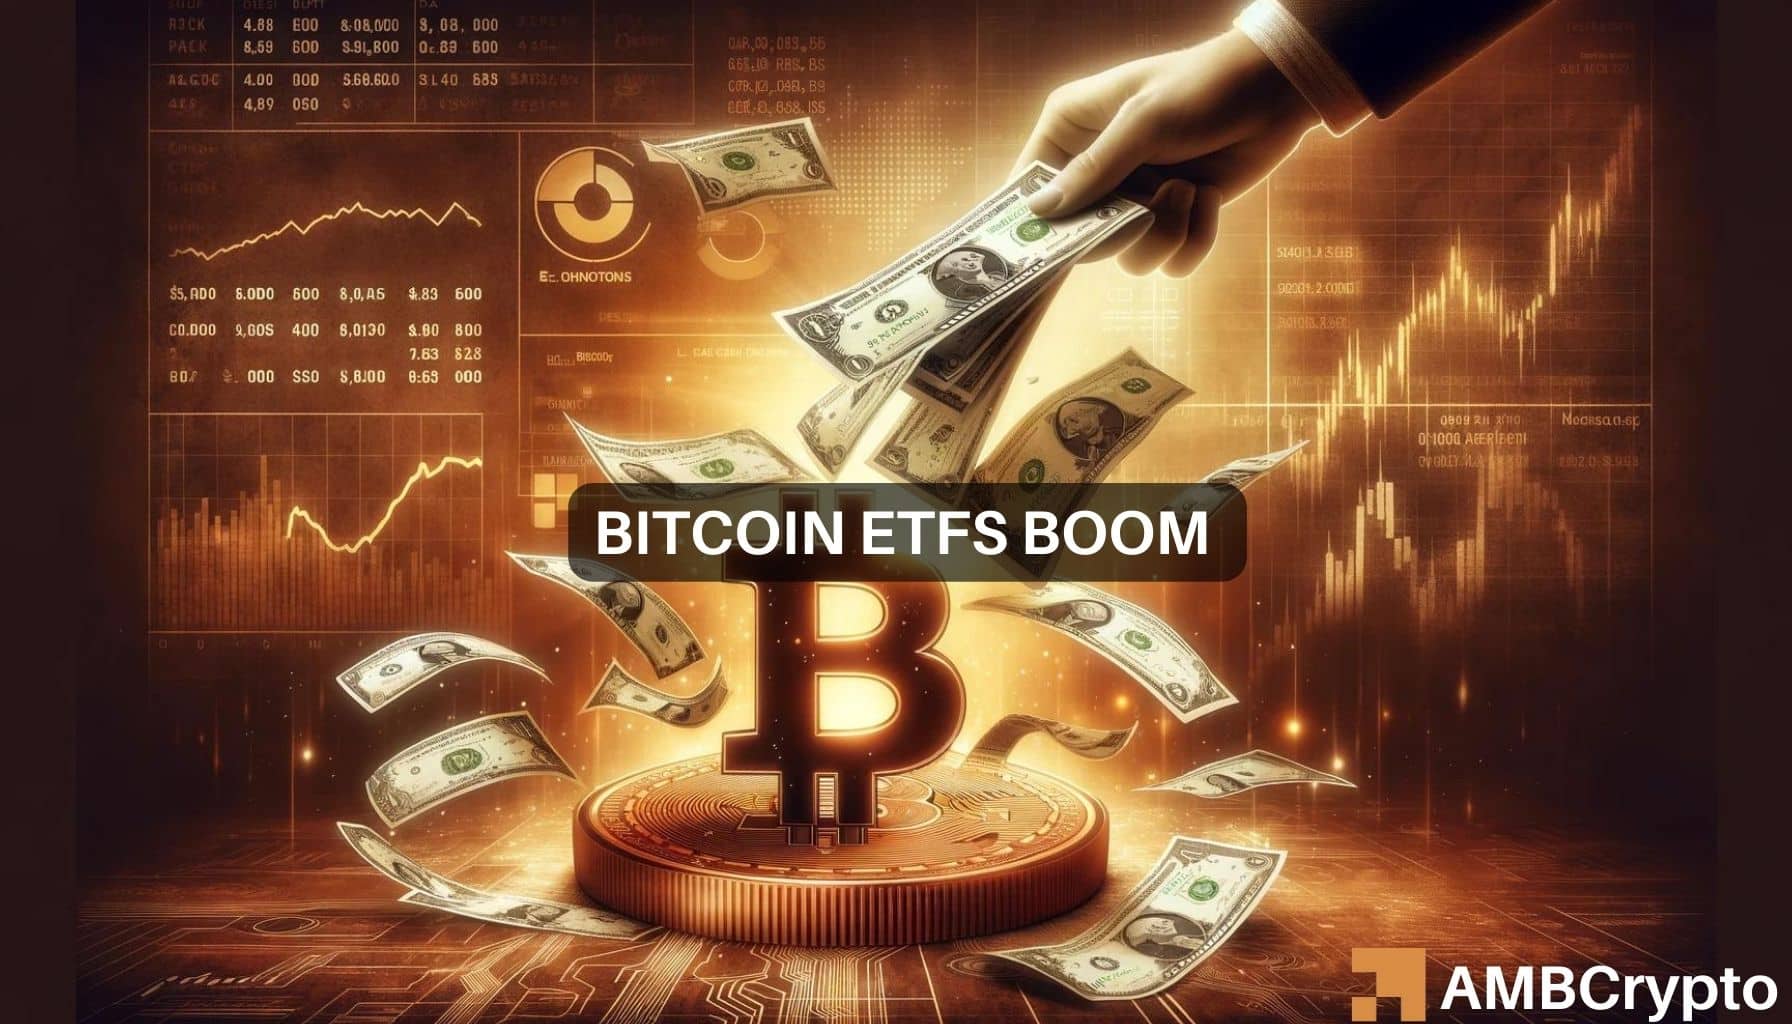 Bitcoin ETFs flooded with billions, but BTC stands still – Why?